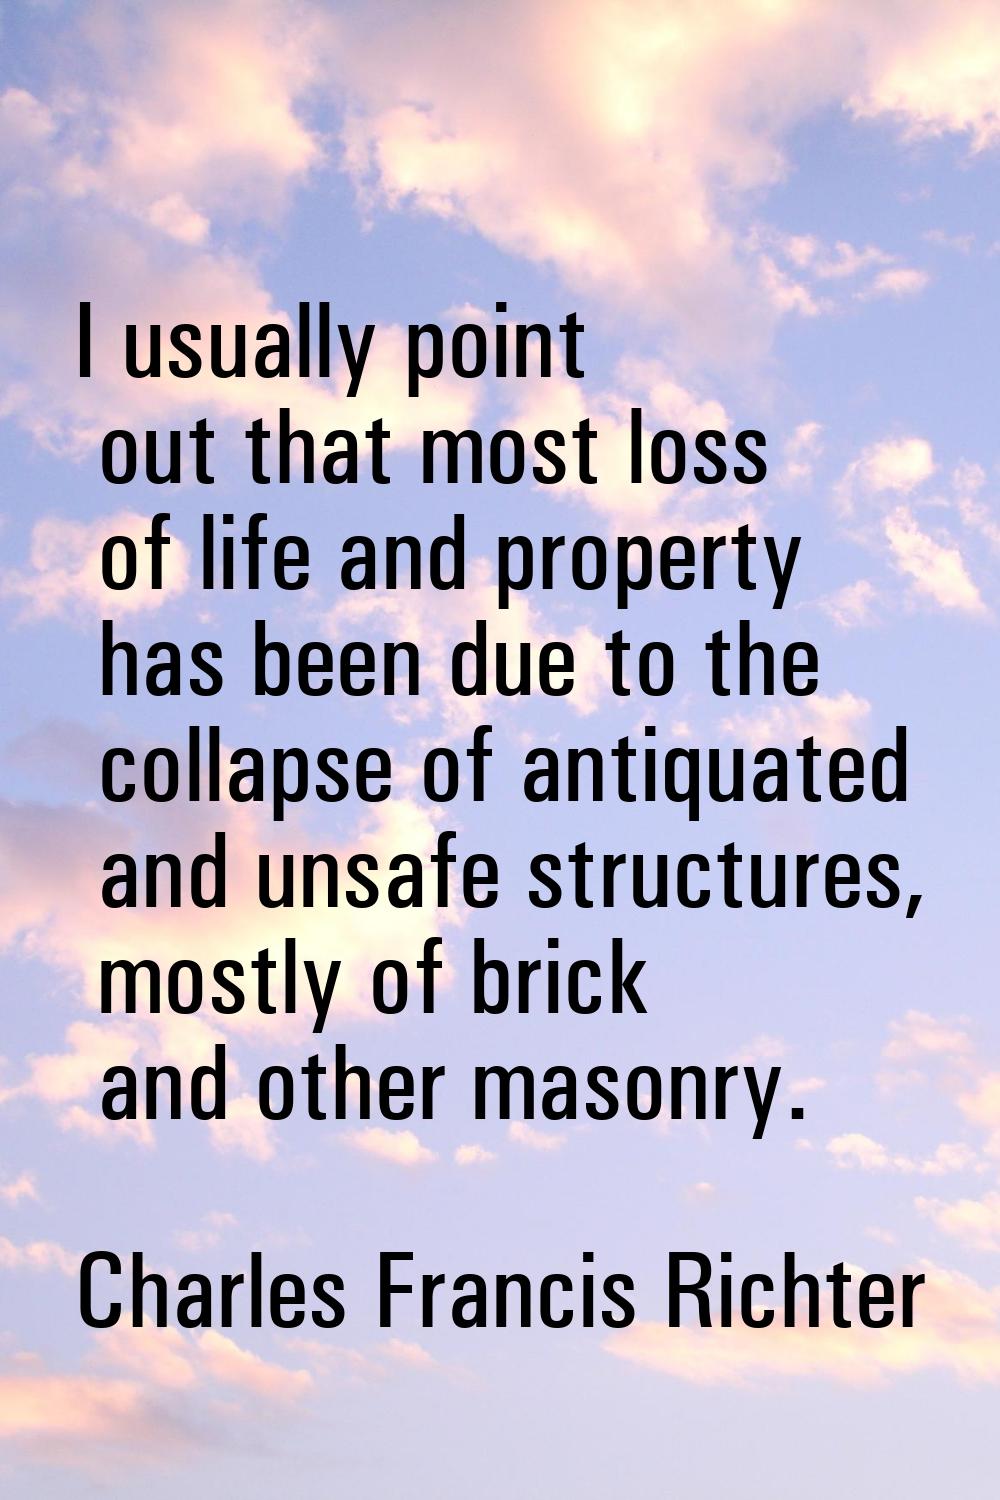 I usually point out that most loss of life and property has been due to the collapse of antiquated 